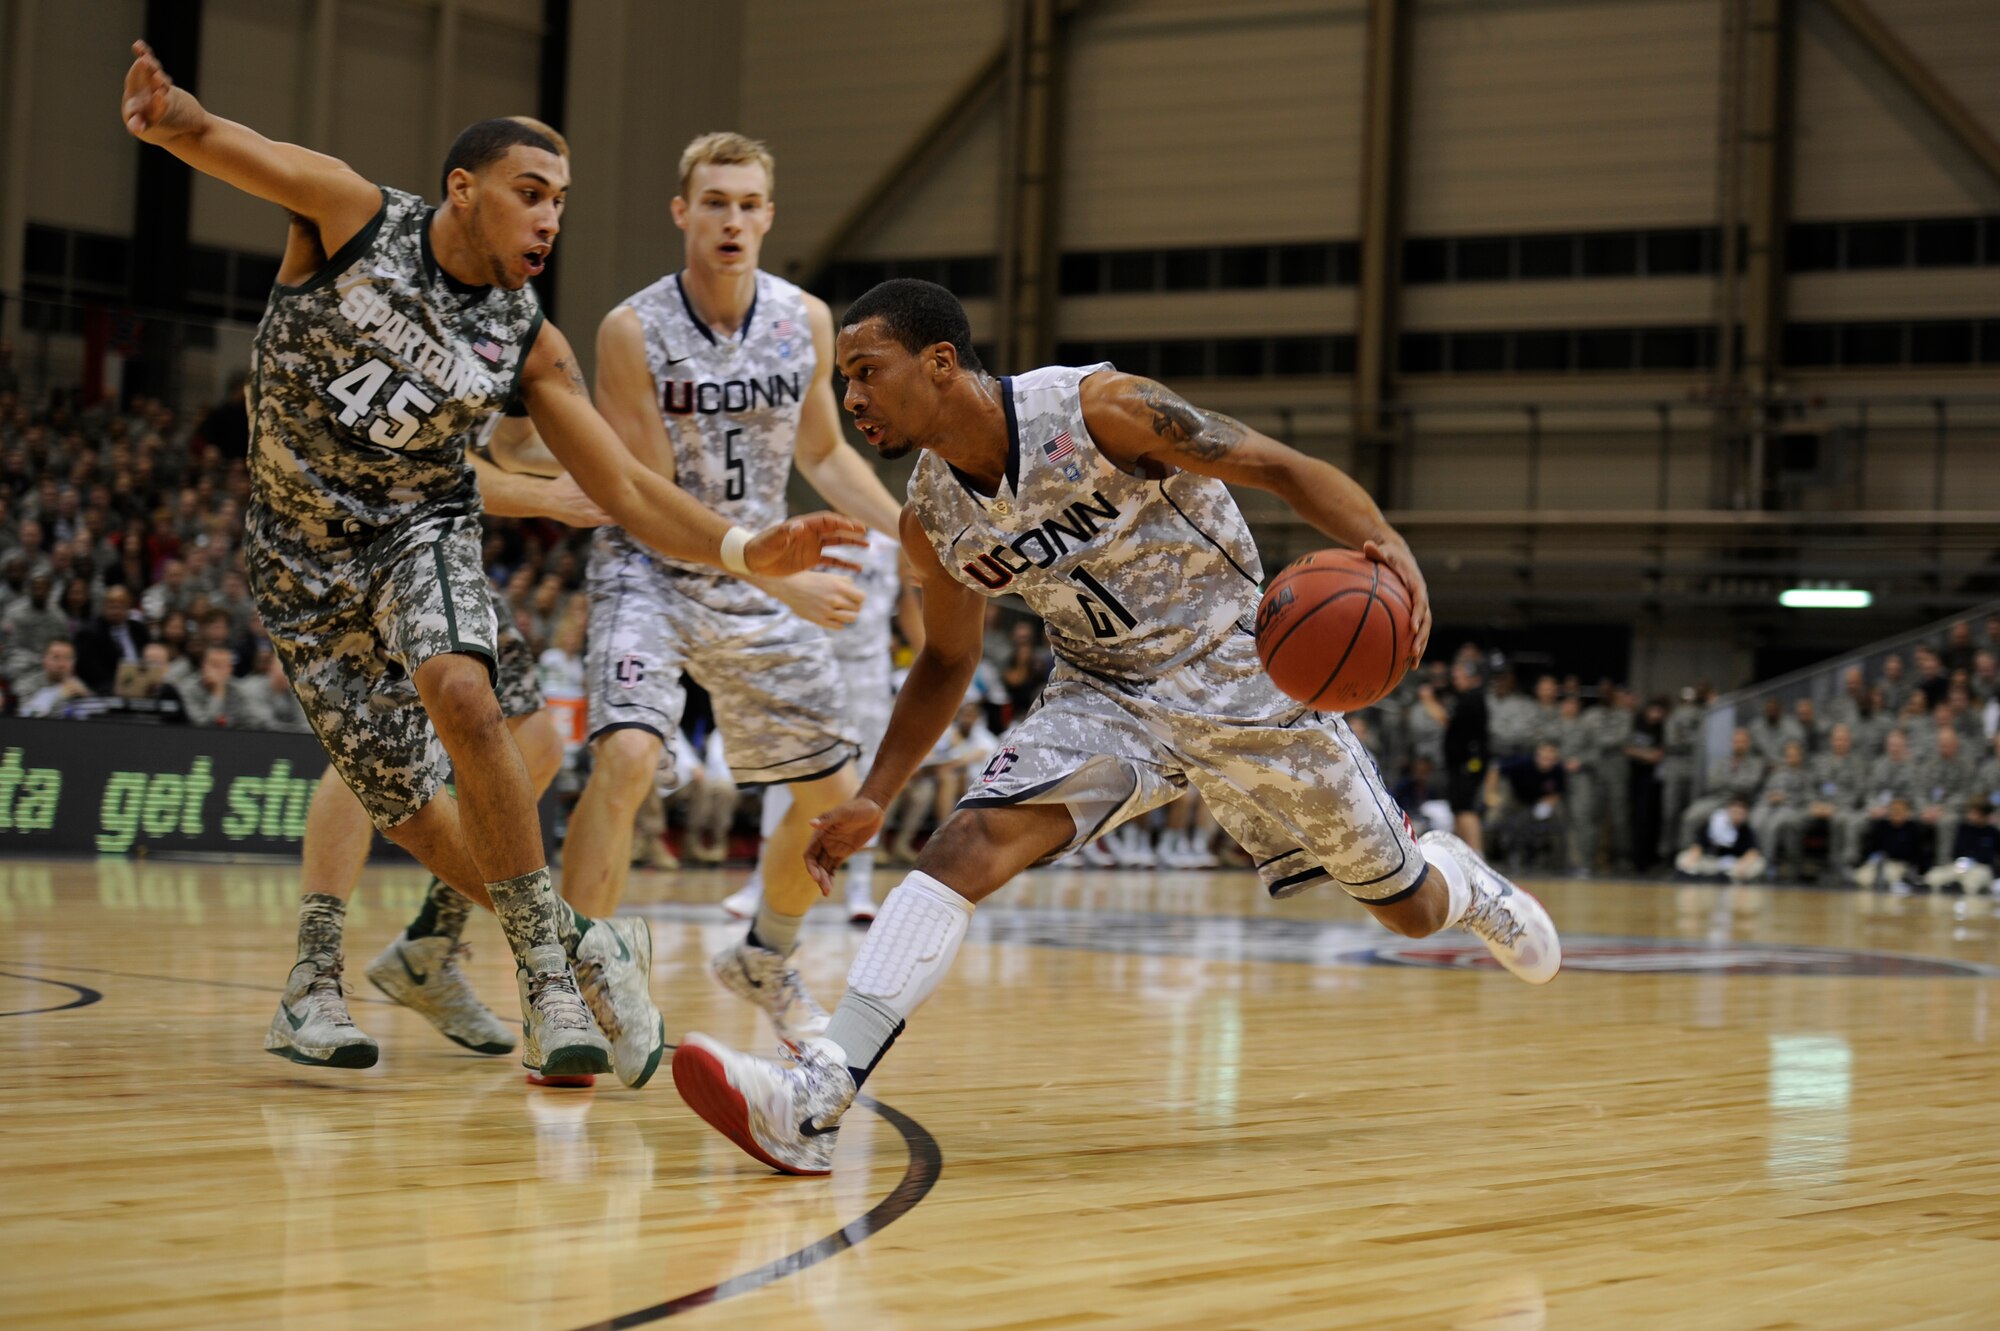 Omar Calhoun, University of Connecticut point guard, sprints for the hoop during the 2012 Armed Forces Classic on Ramstein Air Base, Germany, Nov. 10, 2012. The match-up between Michigan State University and UCONN is part of ESPN's Veteran's week initiative to honor the men and women who have served and are still serving in the U.S. military. (U.S. Air Force photo/Senior Airman Aaron-Forrest Wainwright)